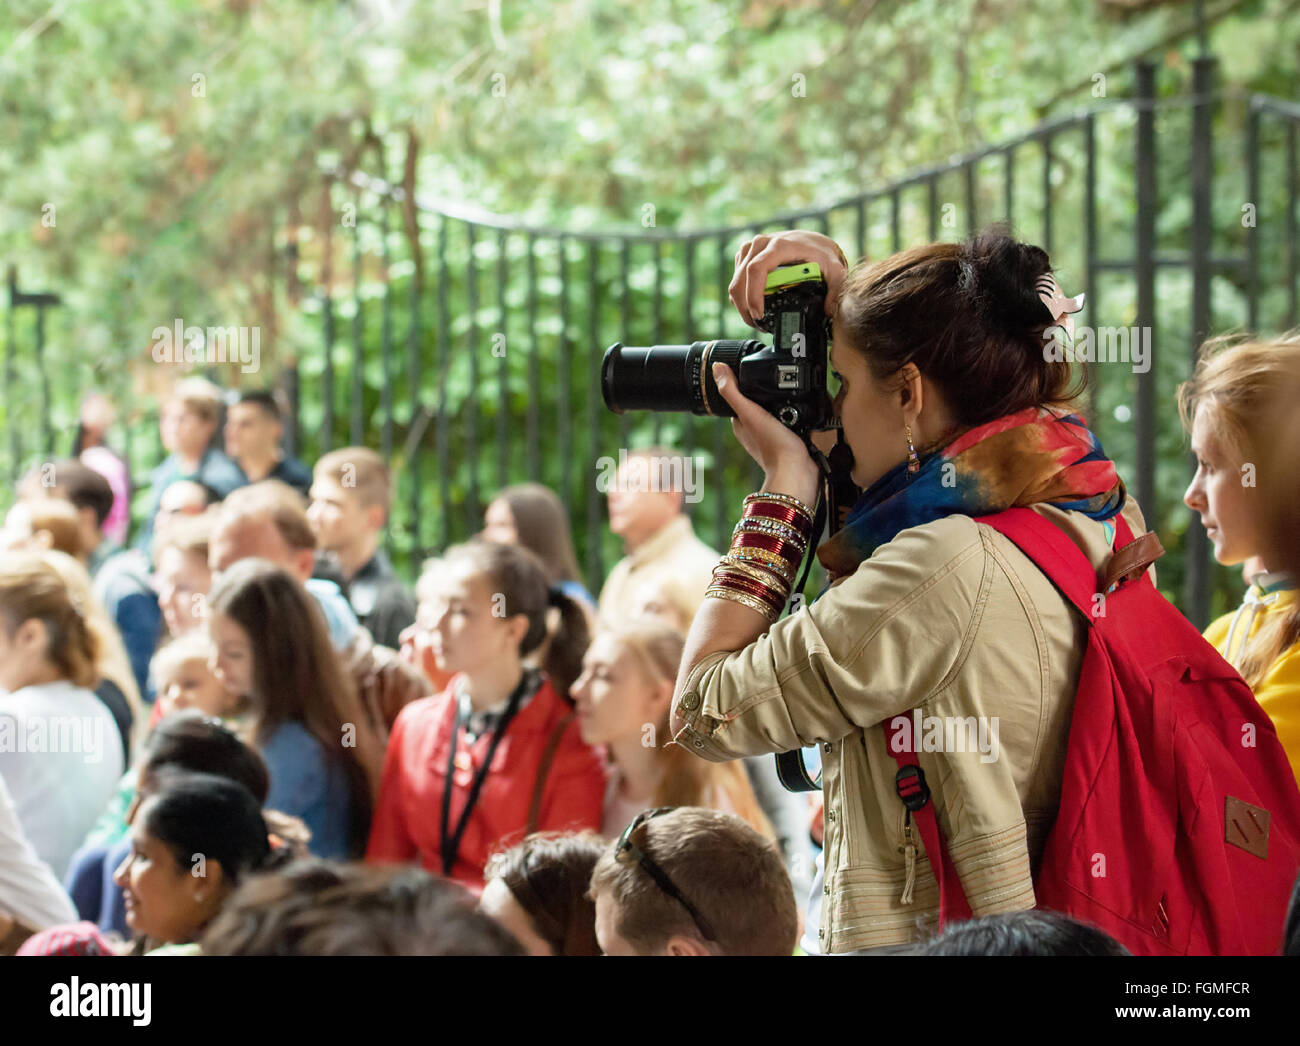 RUSSIA, MOSCOW - AUGUST 16, 2015: Unidentified woman filming an event during Independence Day of India in Sokolniki park, Moscow, Russia Stock Photo